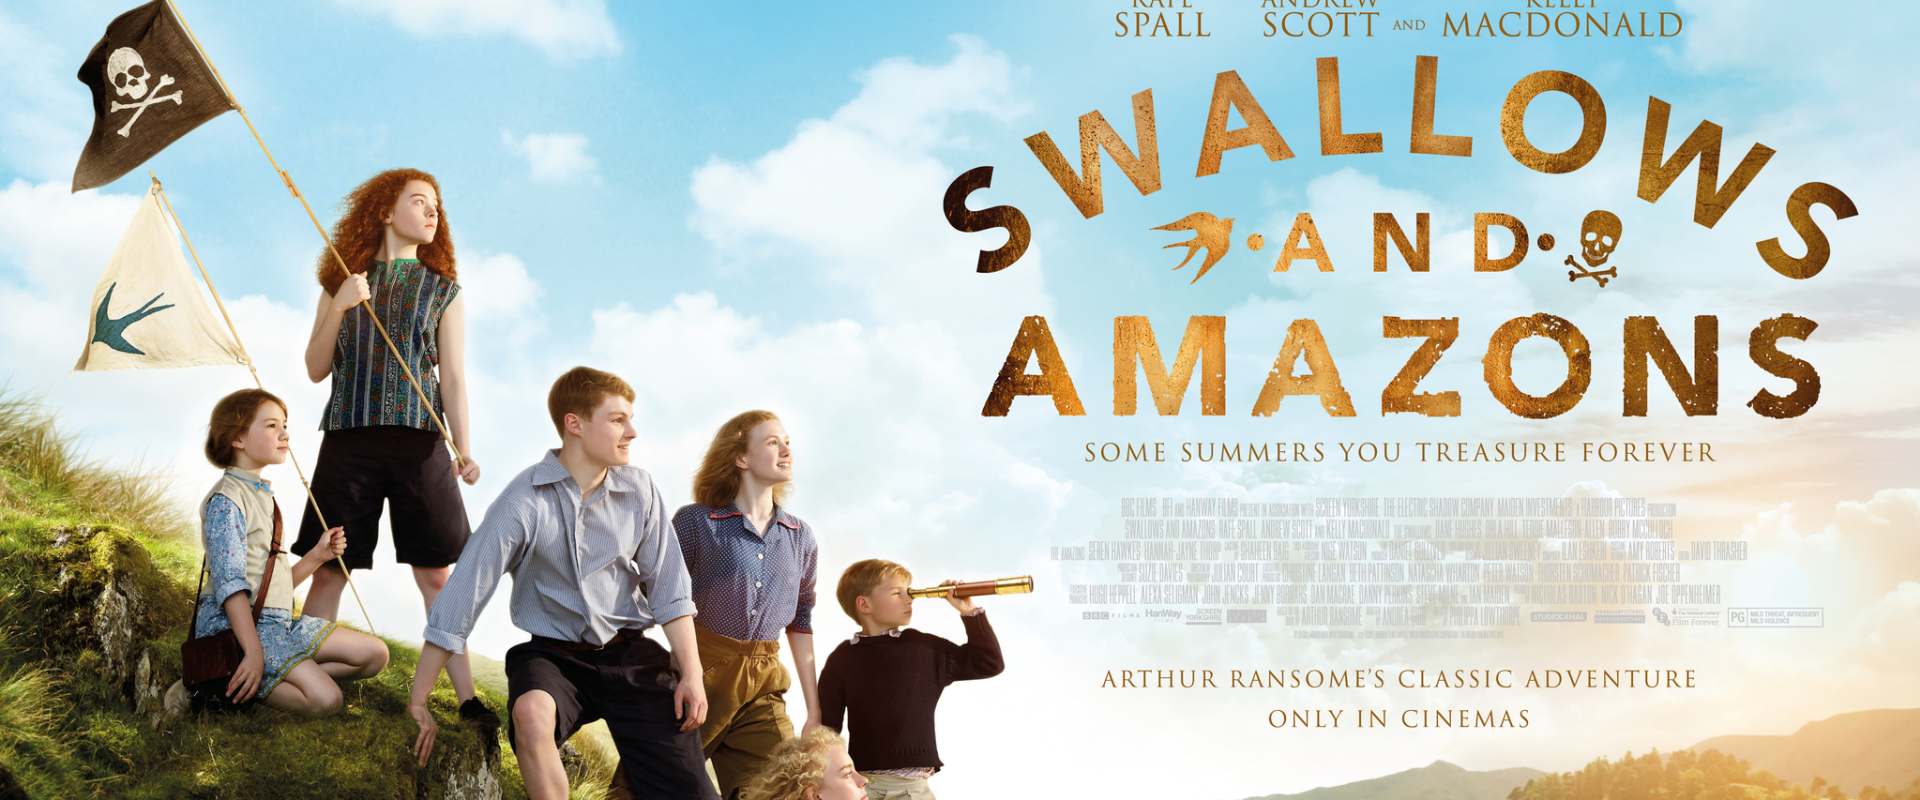 Swallows and Amazons background 2